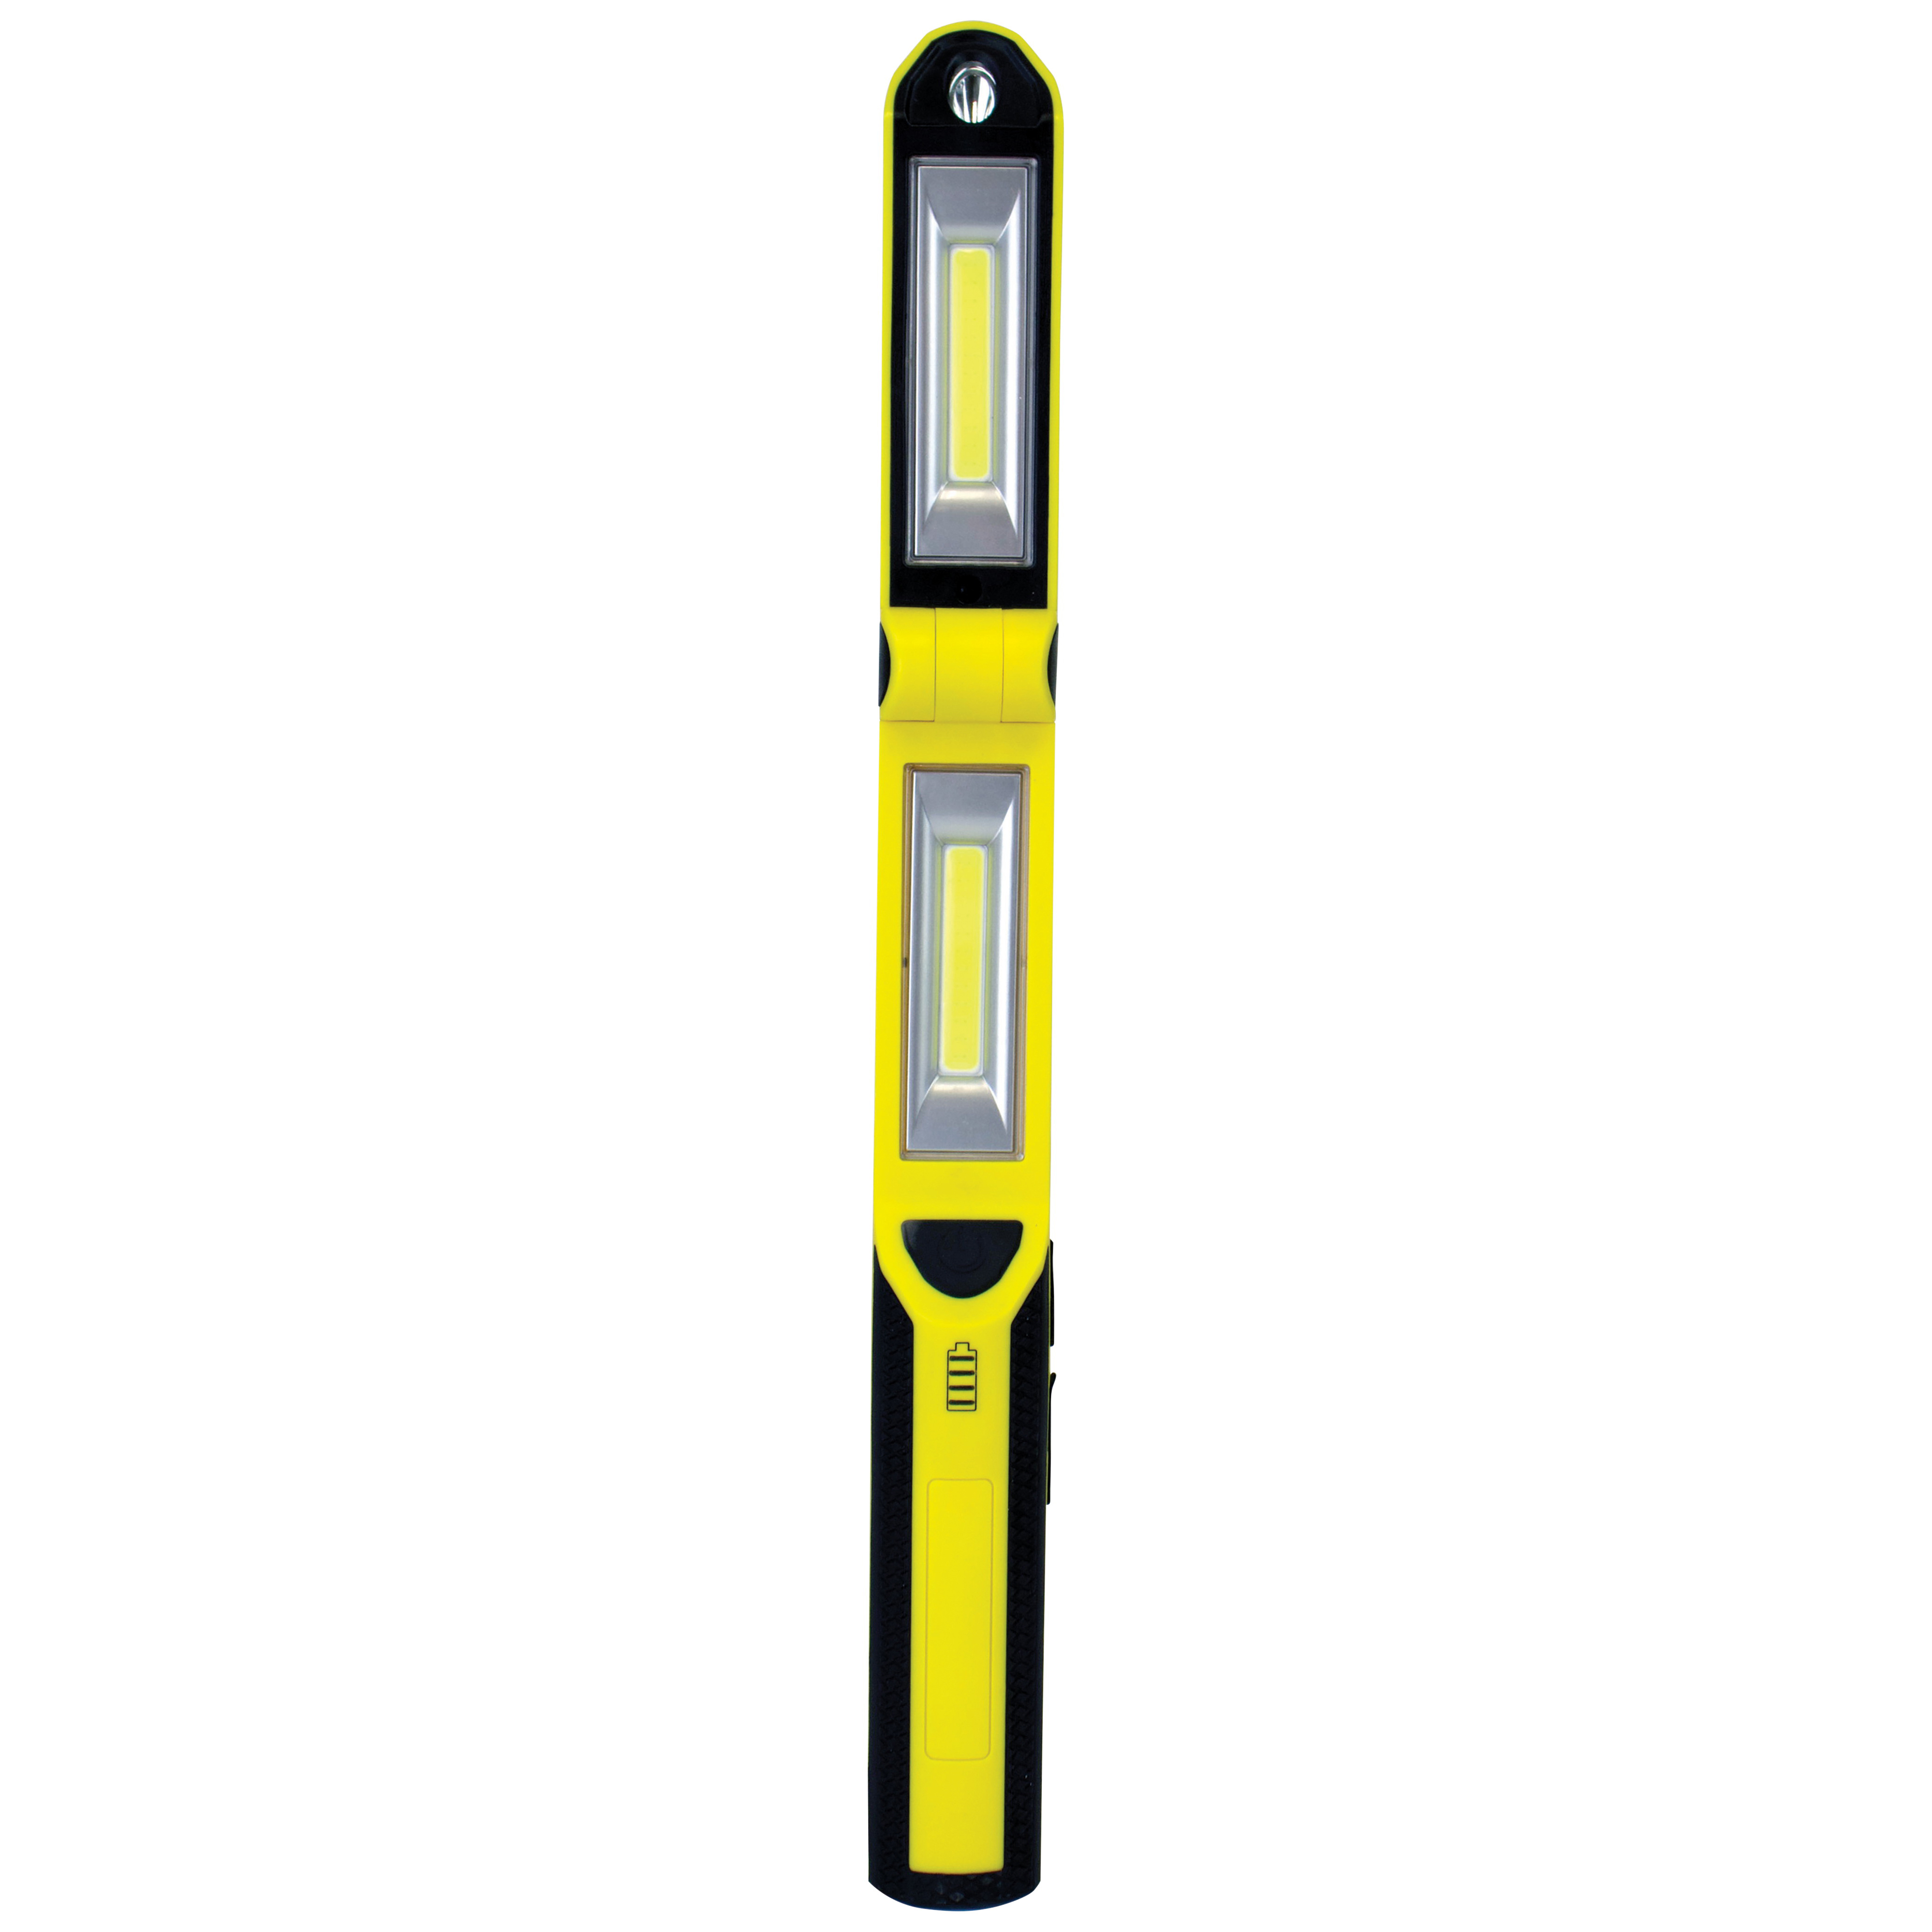 ORLEDRFHH01 Work Light, Lithium-Ion Battery, LED Lamp, 40, 300 and 600 Lumens, Yellow and Black